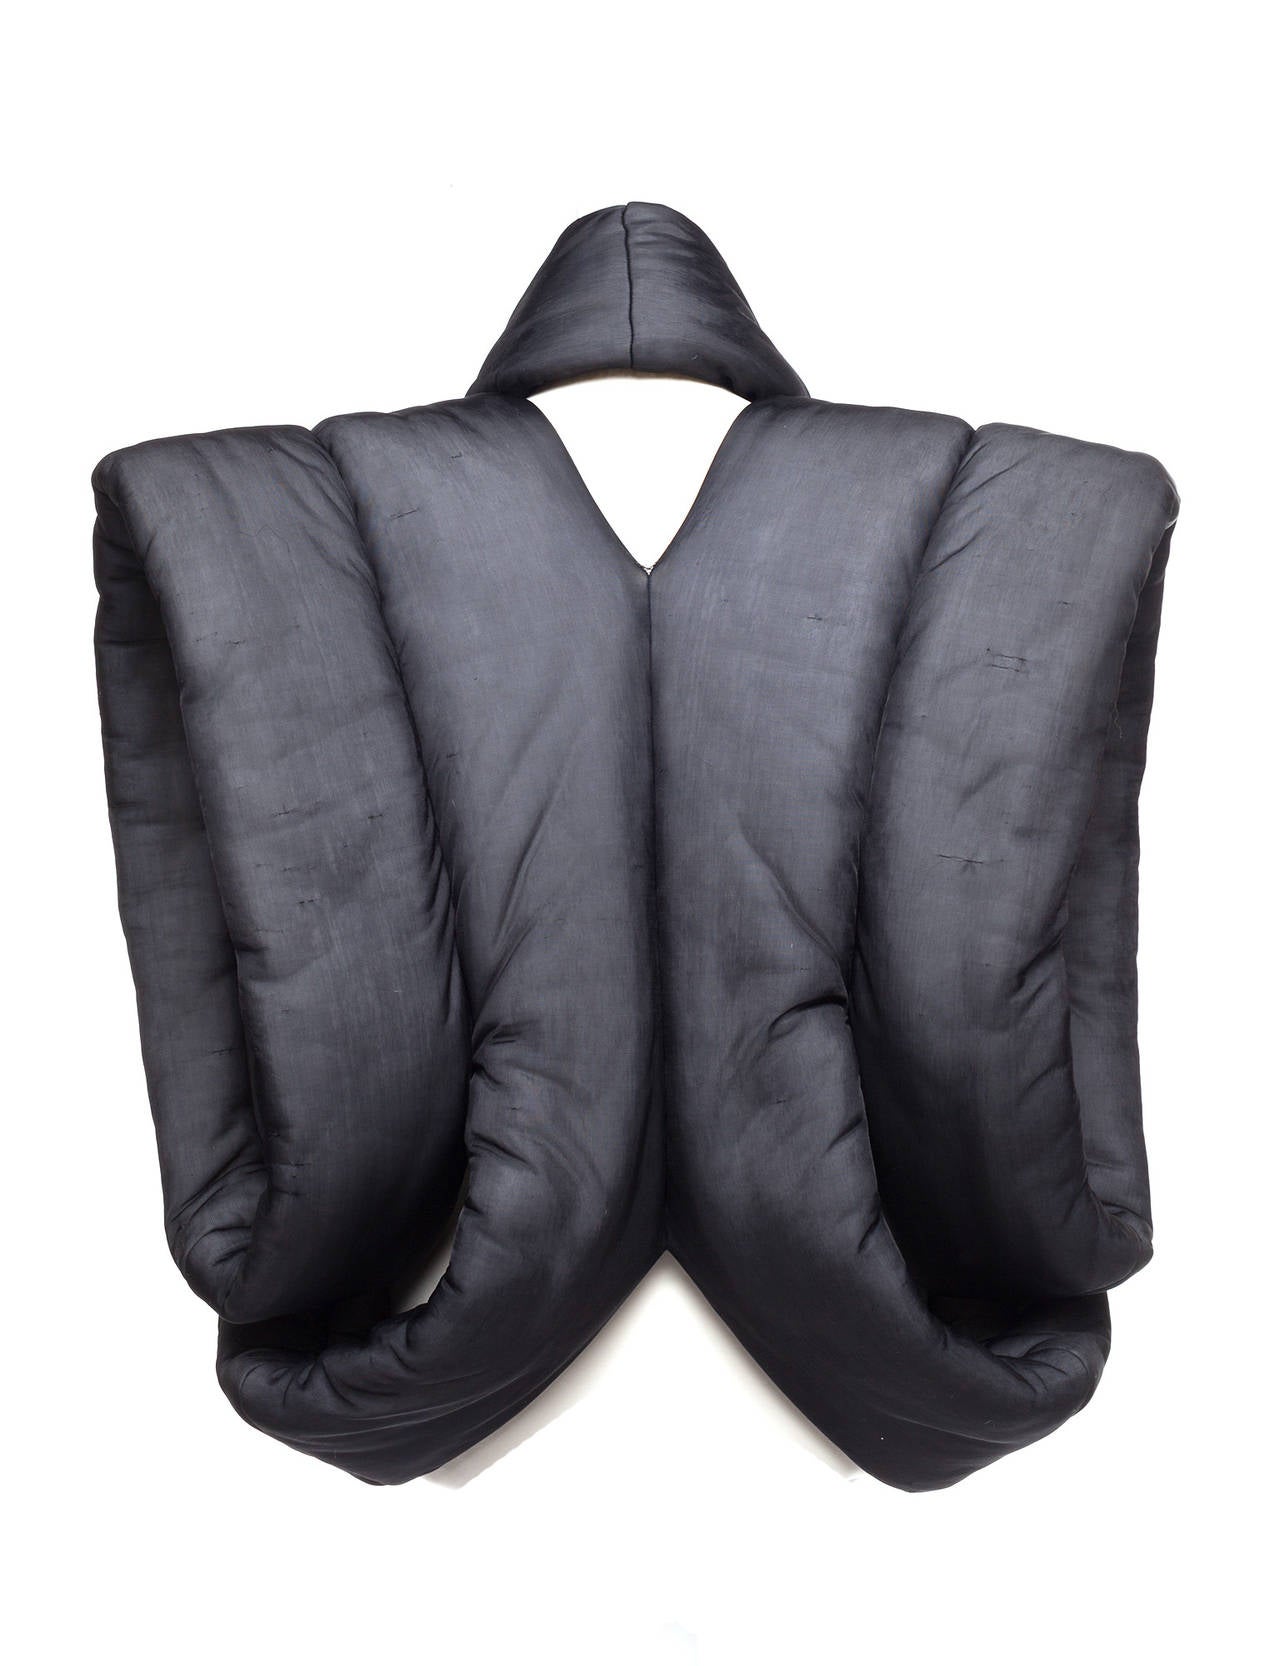 Martin Margiela Fall 07 *Collectors Item* Padded Oversized Vest, One Size In Excellent Condition For Sale In Berlin, DE